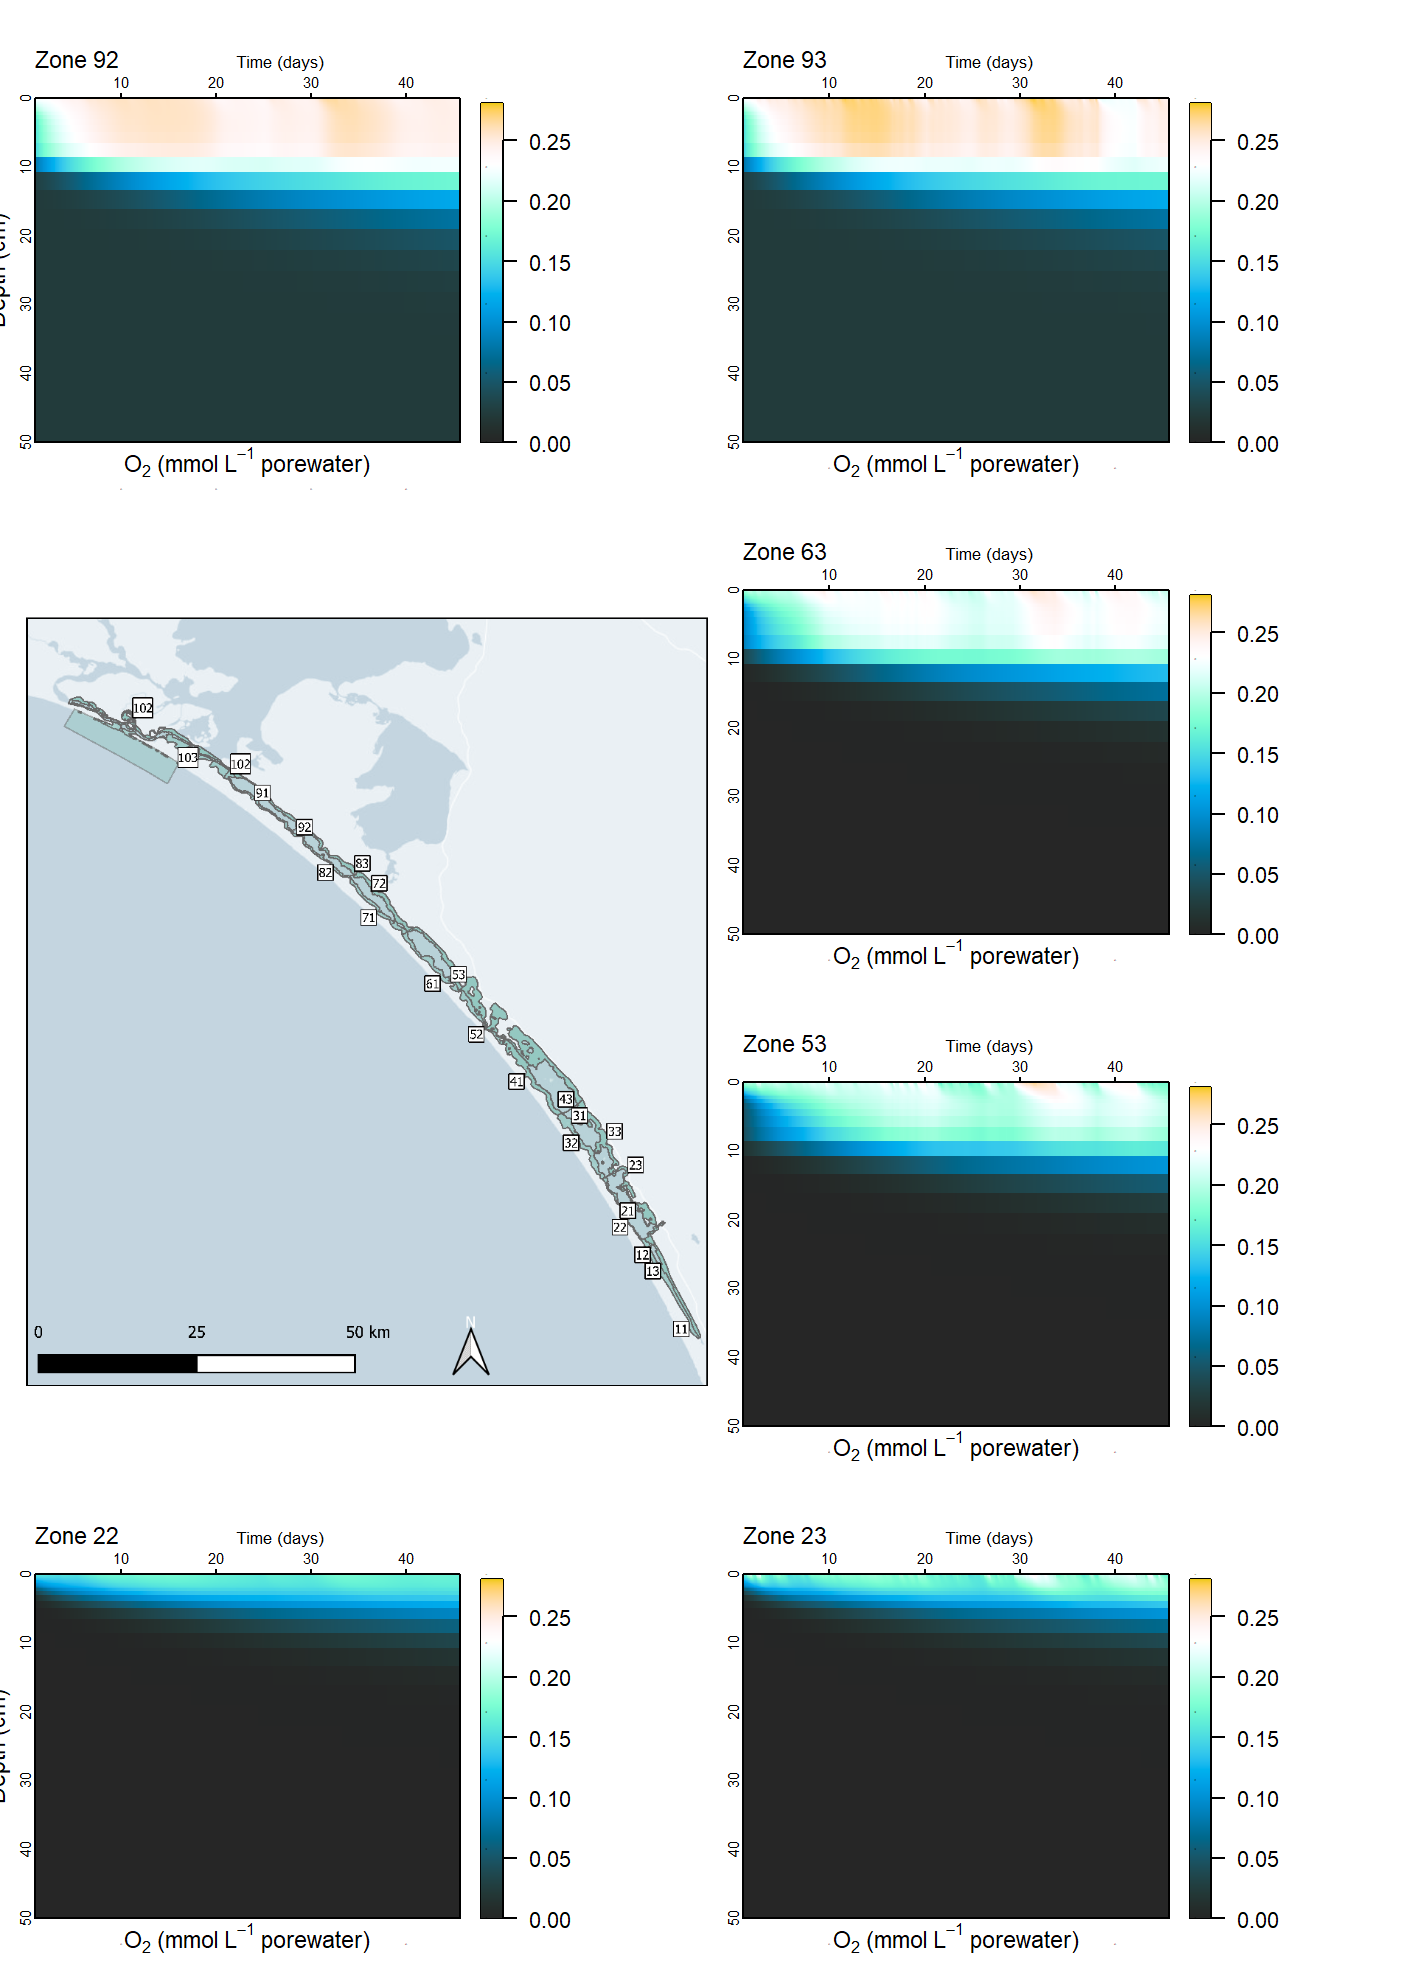 Simulated sediment concentrations of oxygen in different zones along the length of the lagoon.